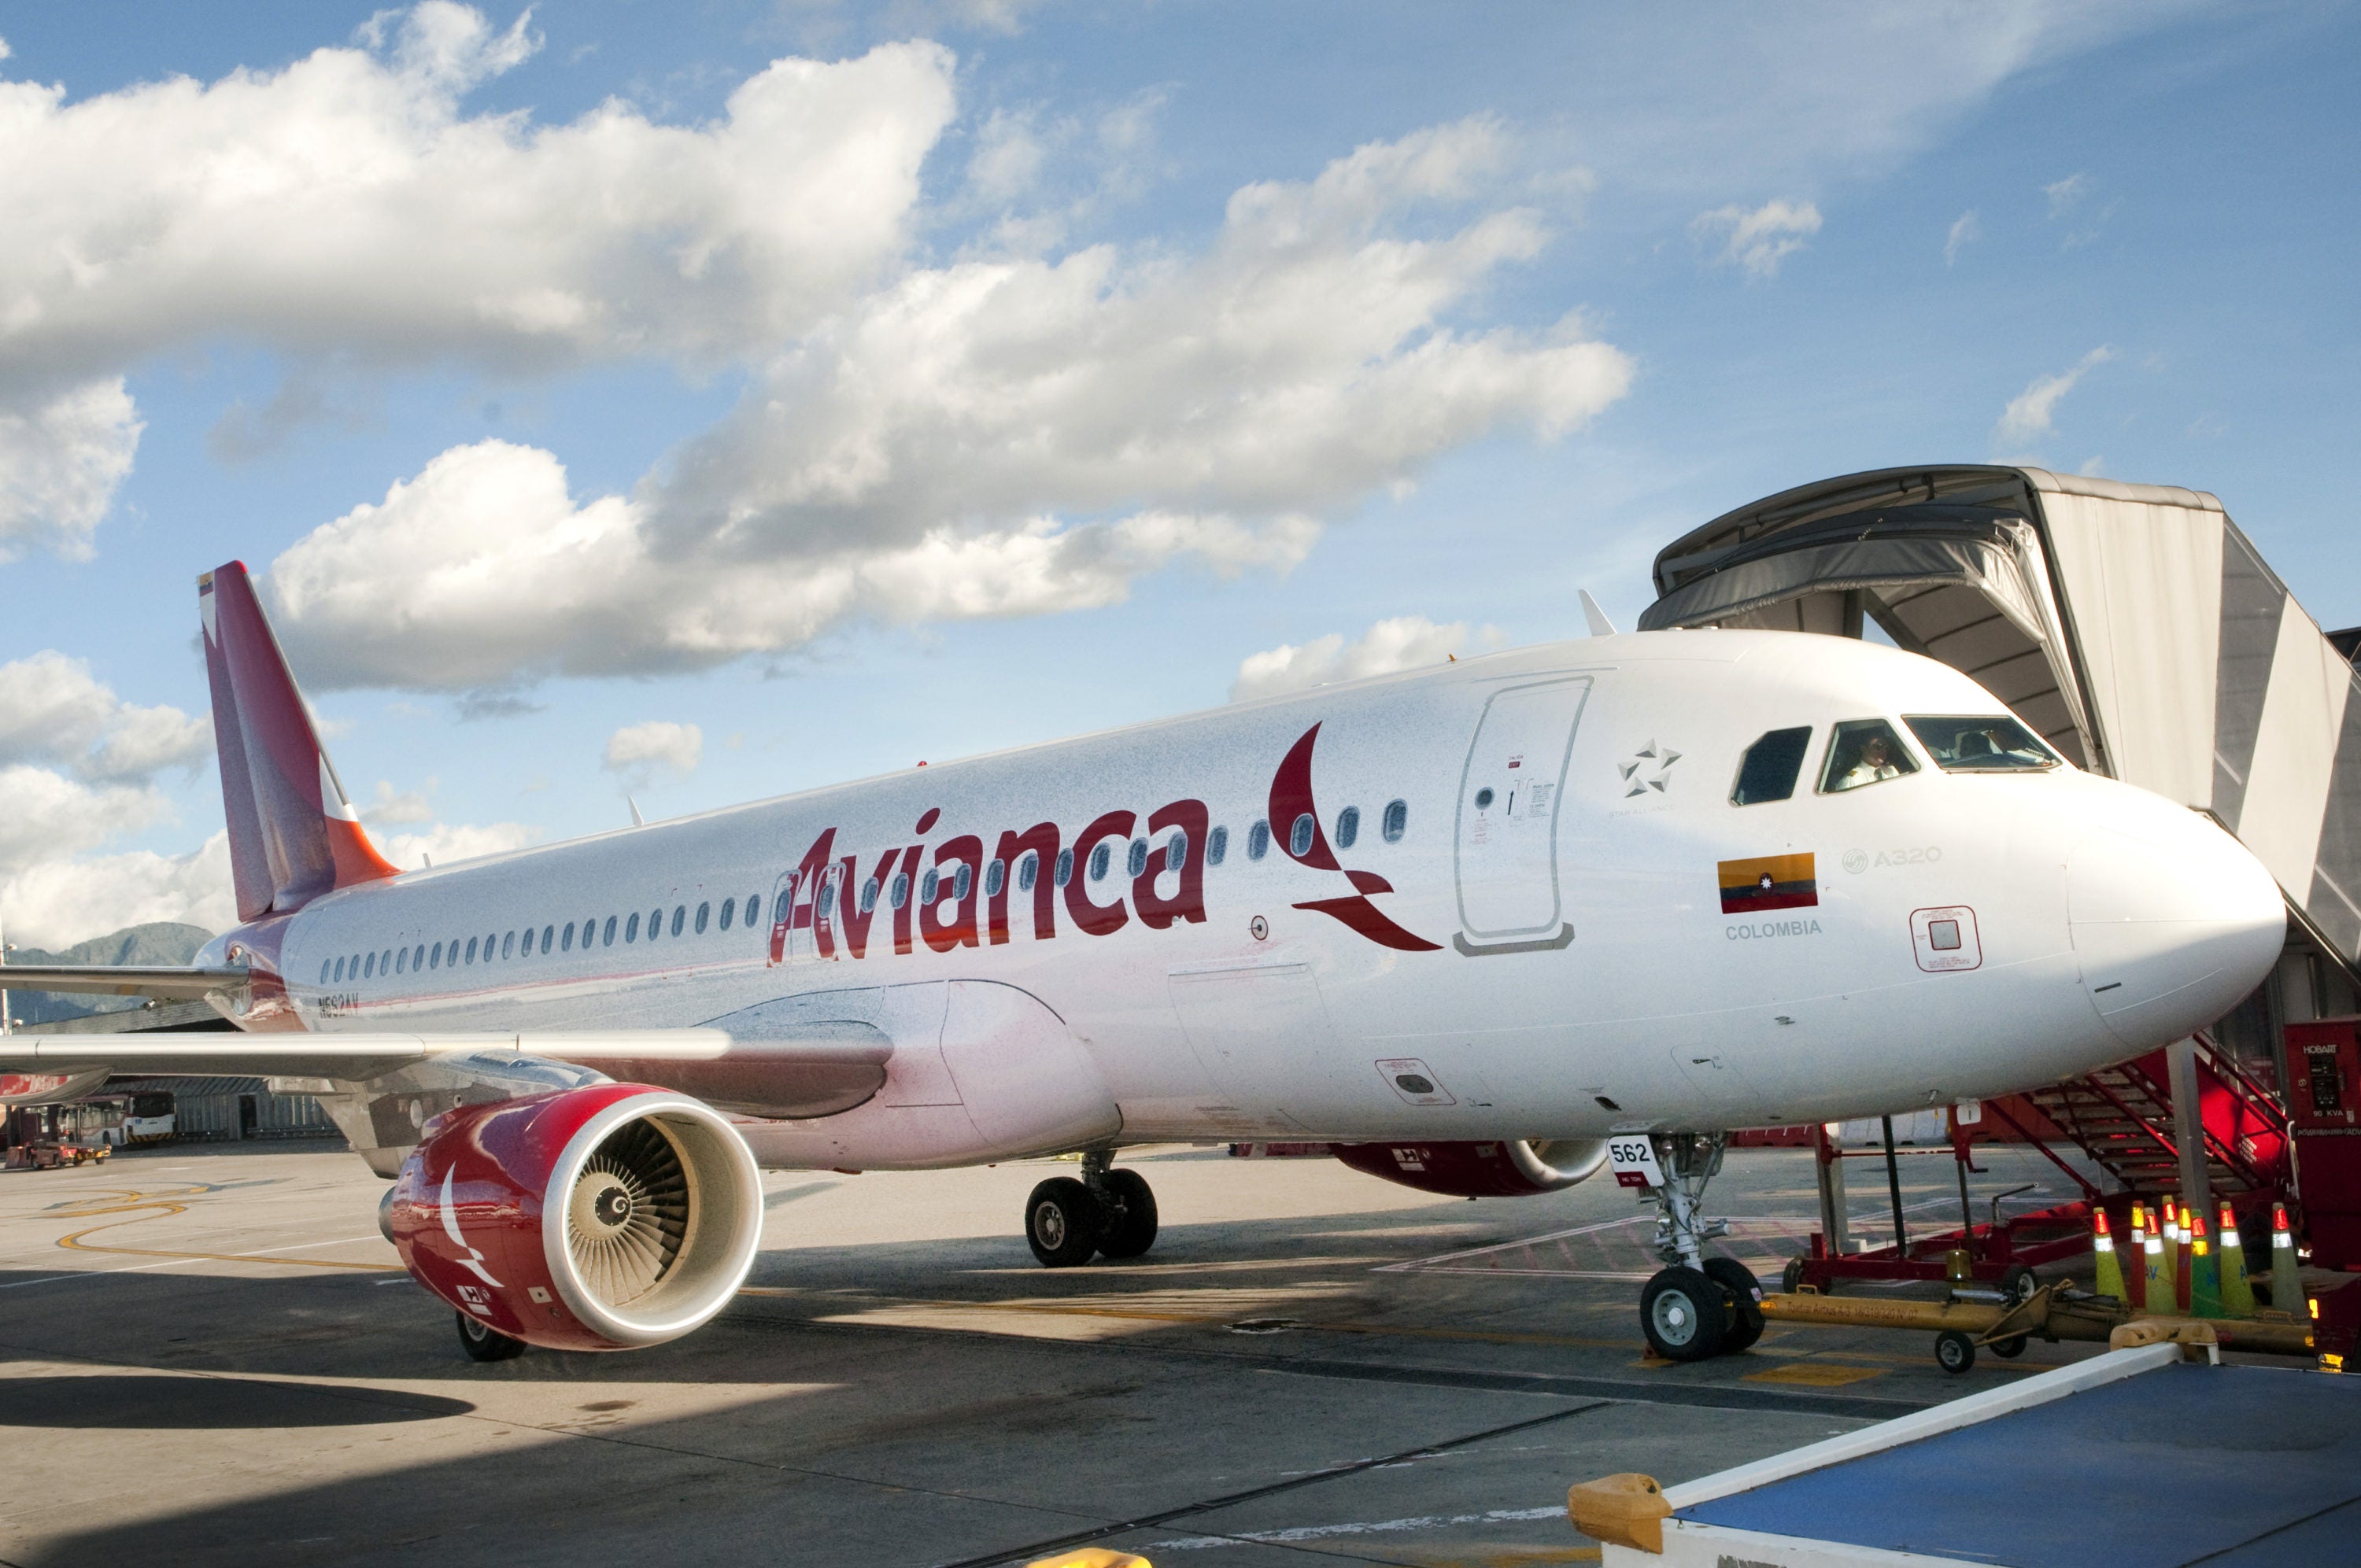 Avianca A320 at airport